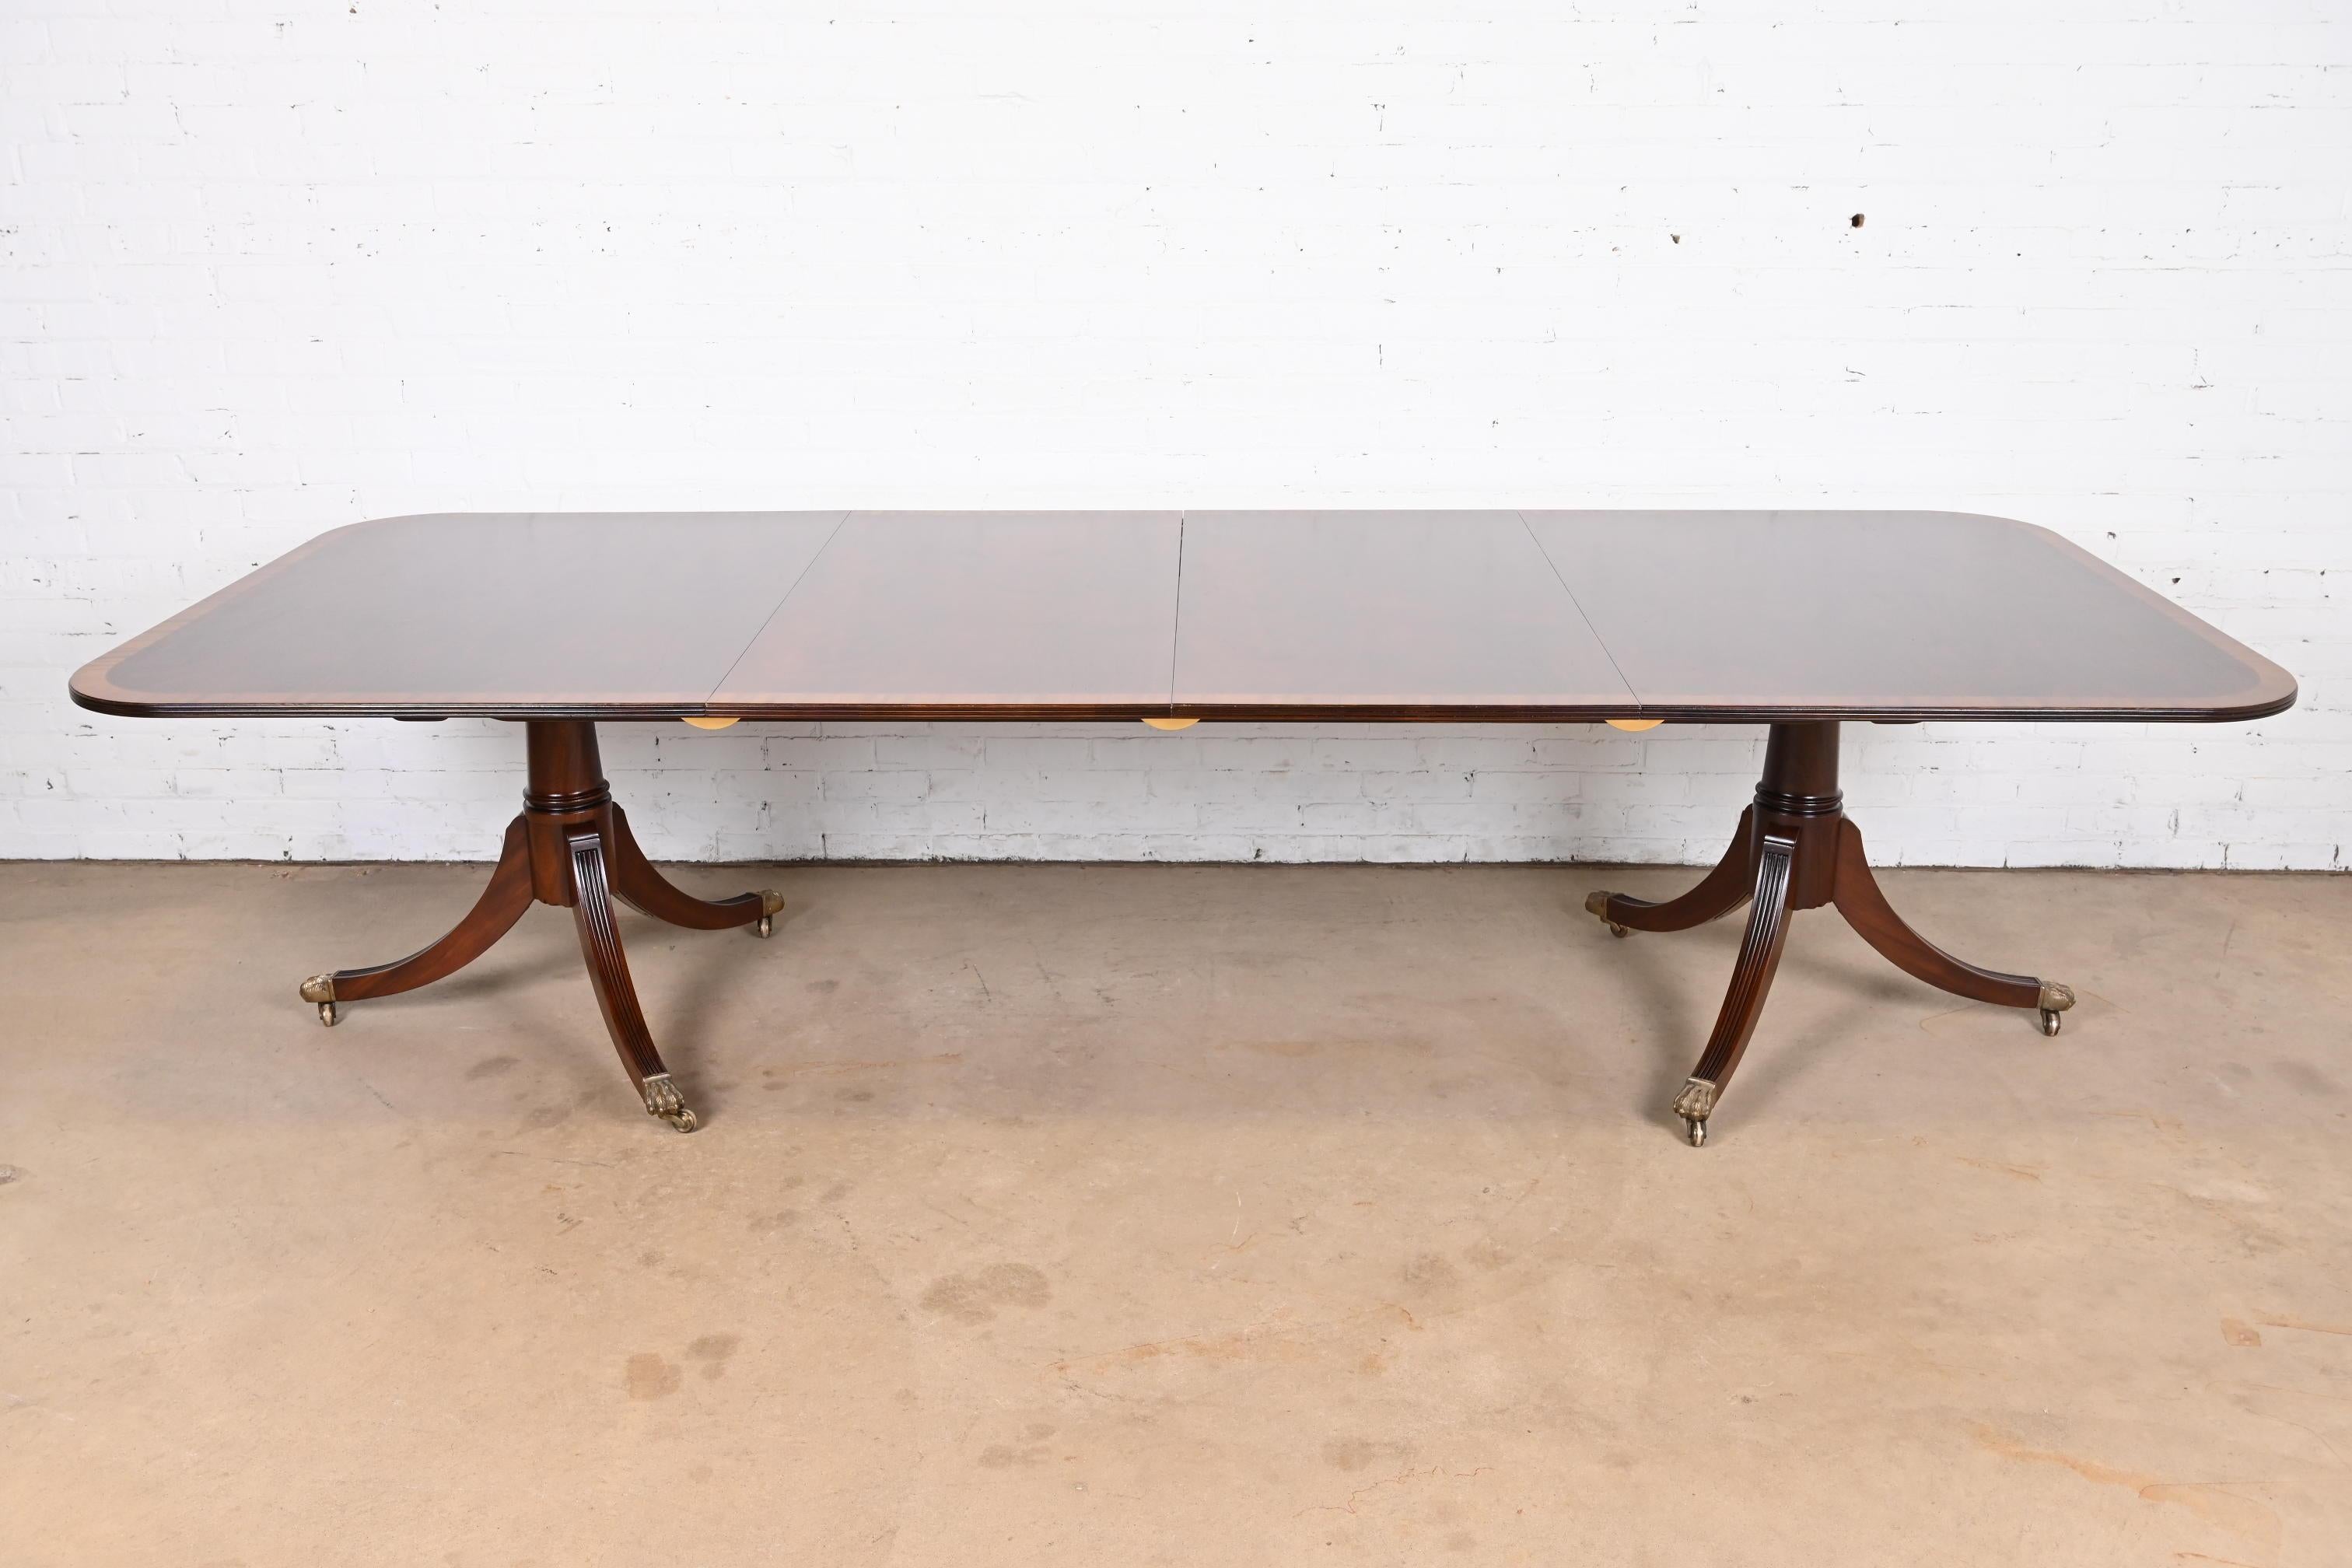 An exceptional Georgian or Regency style double pedestal extension dining table

In the manner of Baker Furniture

England, Circa 1980s

Beautiful mahogany top, with satinwood banding, carved solid mahogany pedestals, and brass paw feet on brass